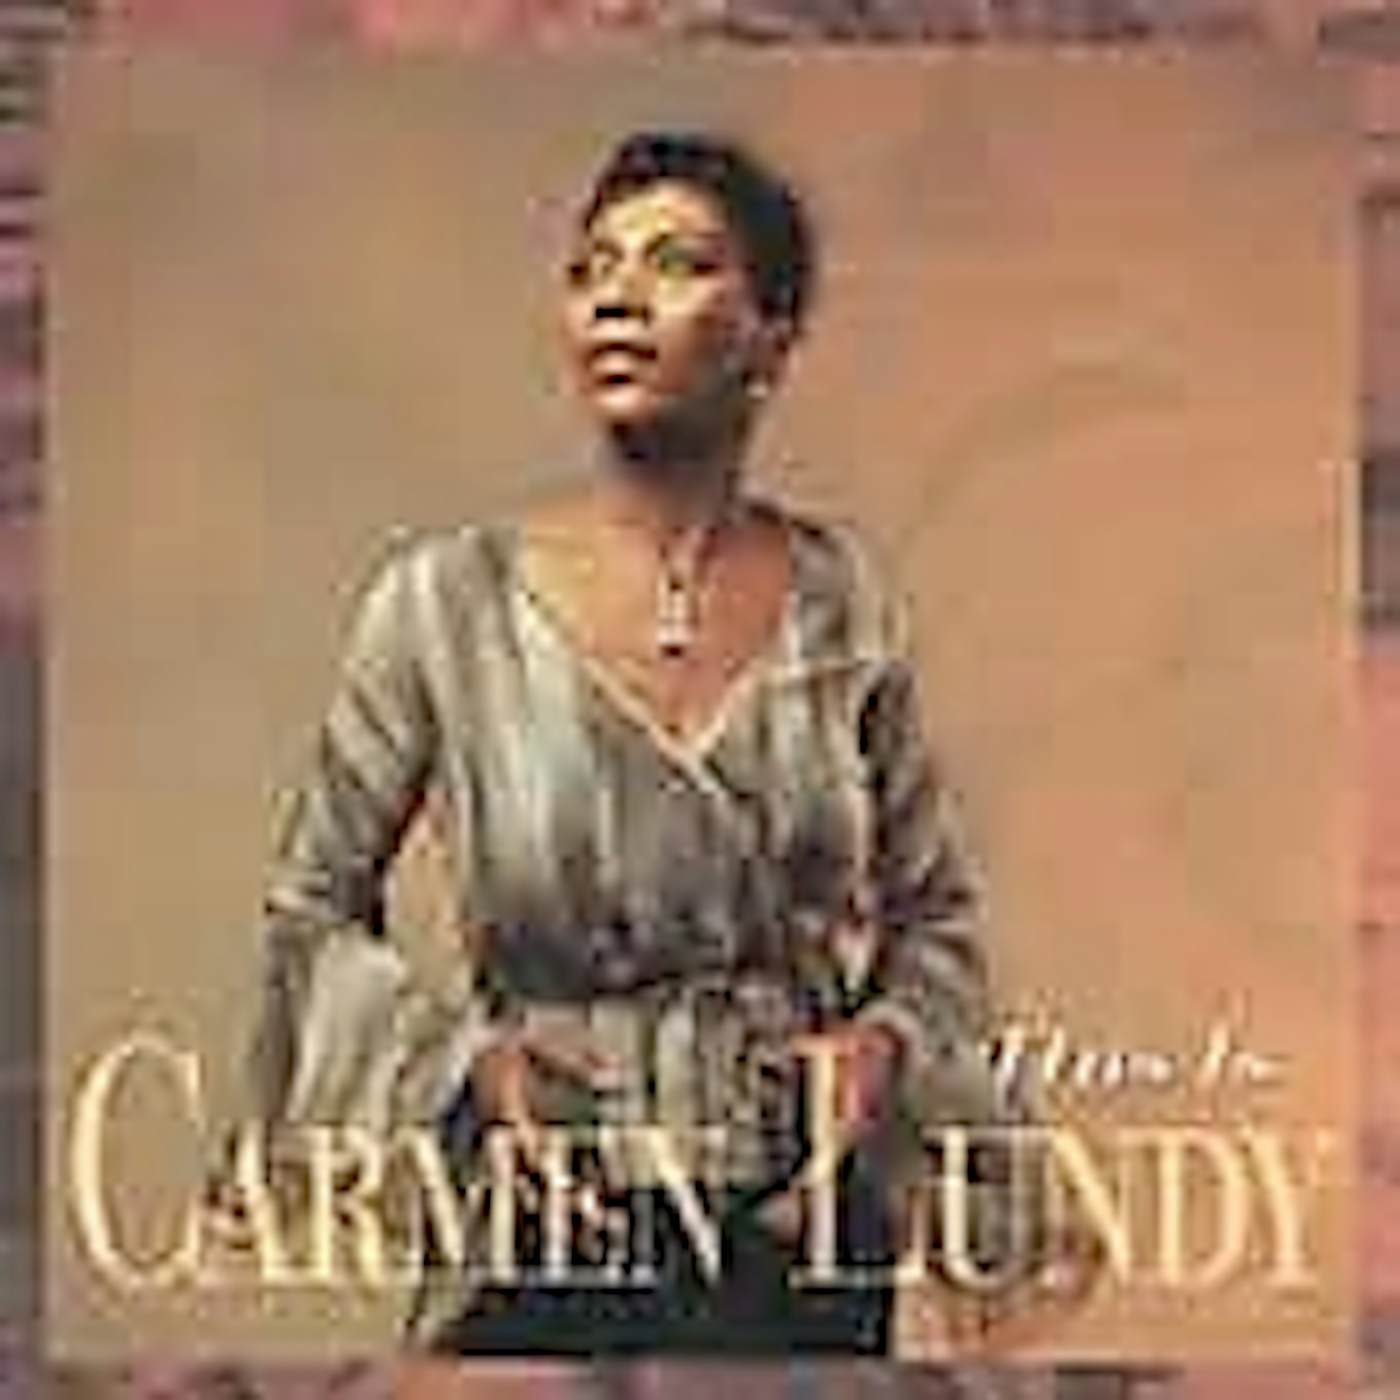 THIS IS CARMEN LUNDY CD